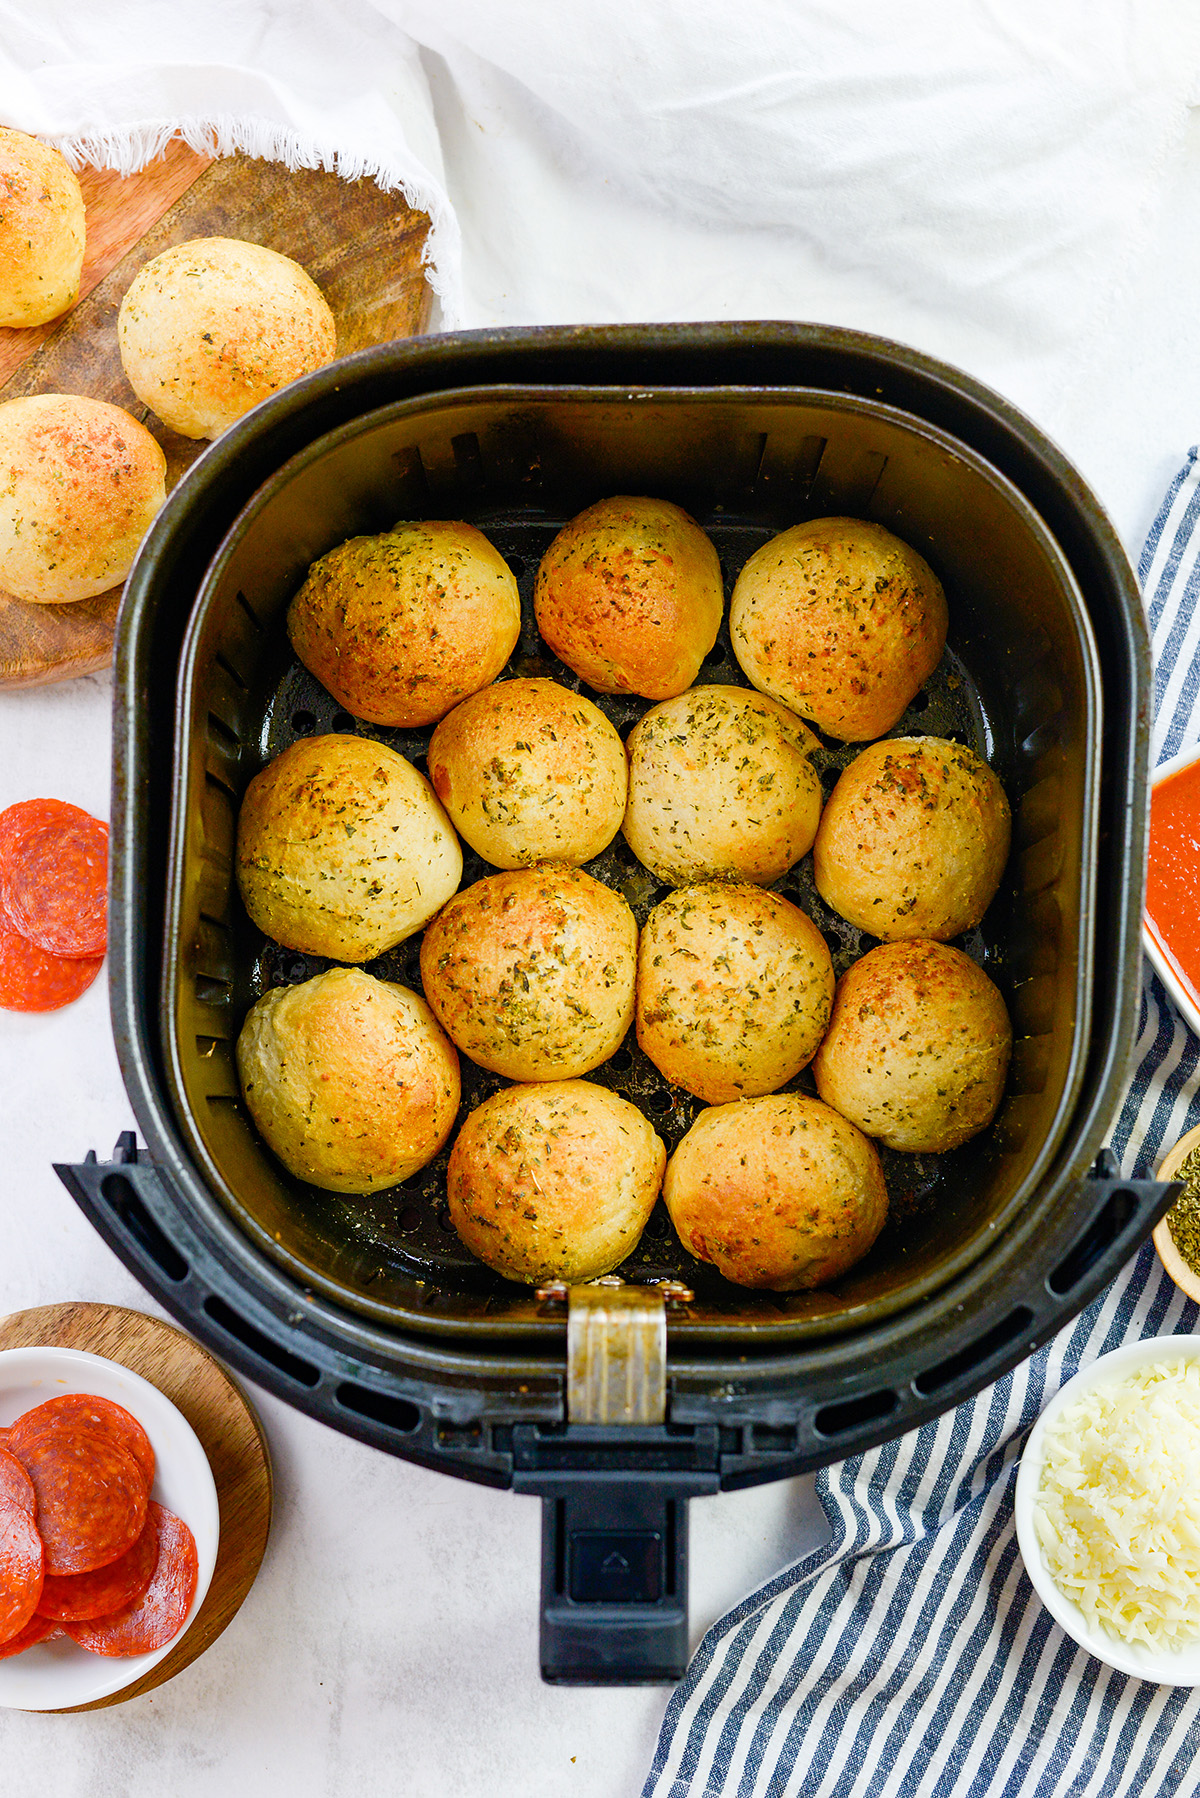 13 pizza bombs in an air fryer basket.